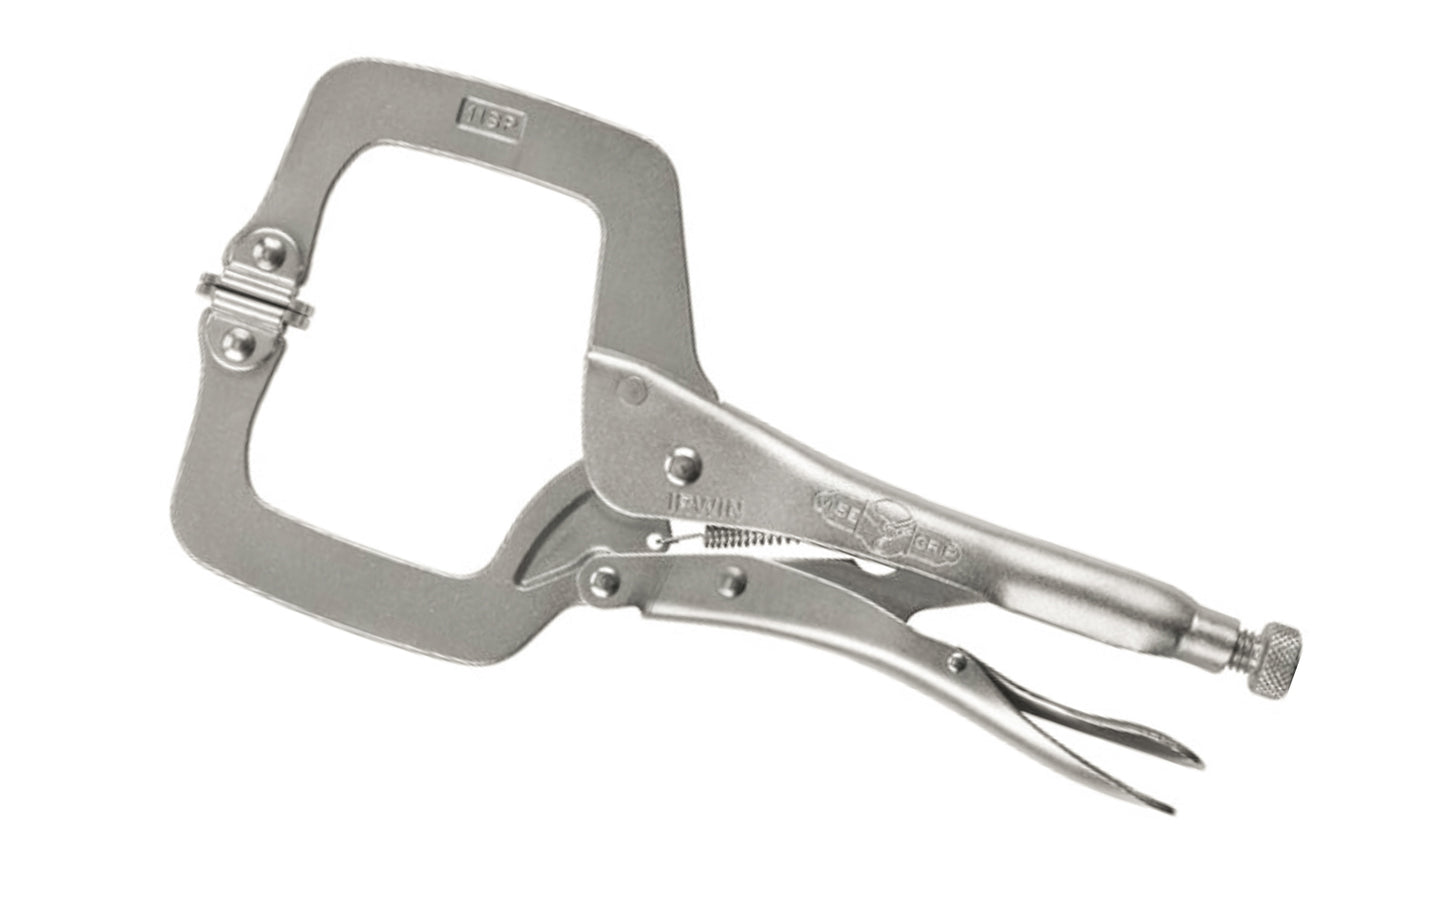 Irwin 11" "The Original" Vise Grip Locking C-Clamp Plier. Model 11SP. Item No. 20. Turn screw to adjust pressure and fit work. Stays adjusted for repetitive use. Constructed of high-grade heat-treated alloy steel for maximum toughness & durability. 4" Jaw Capacity.